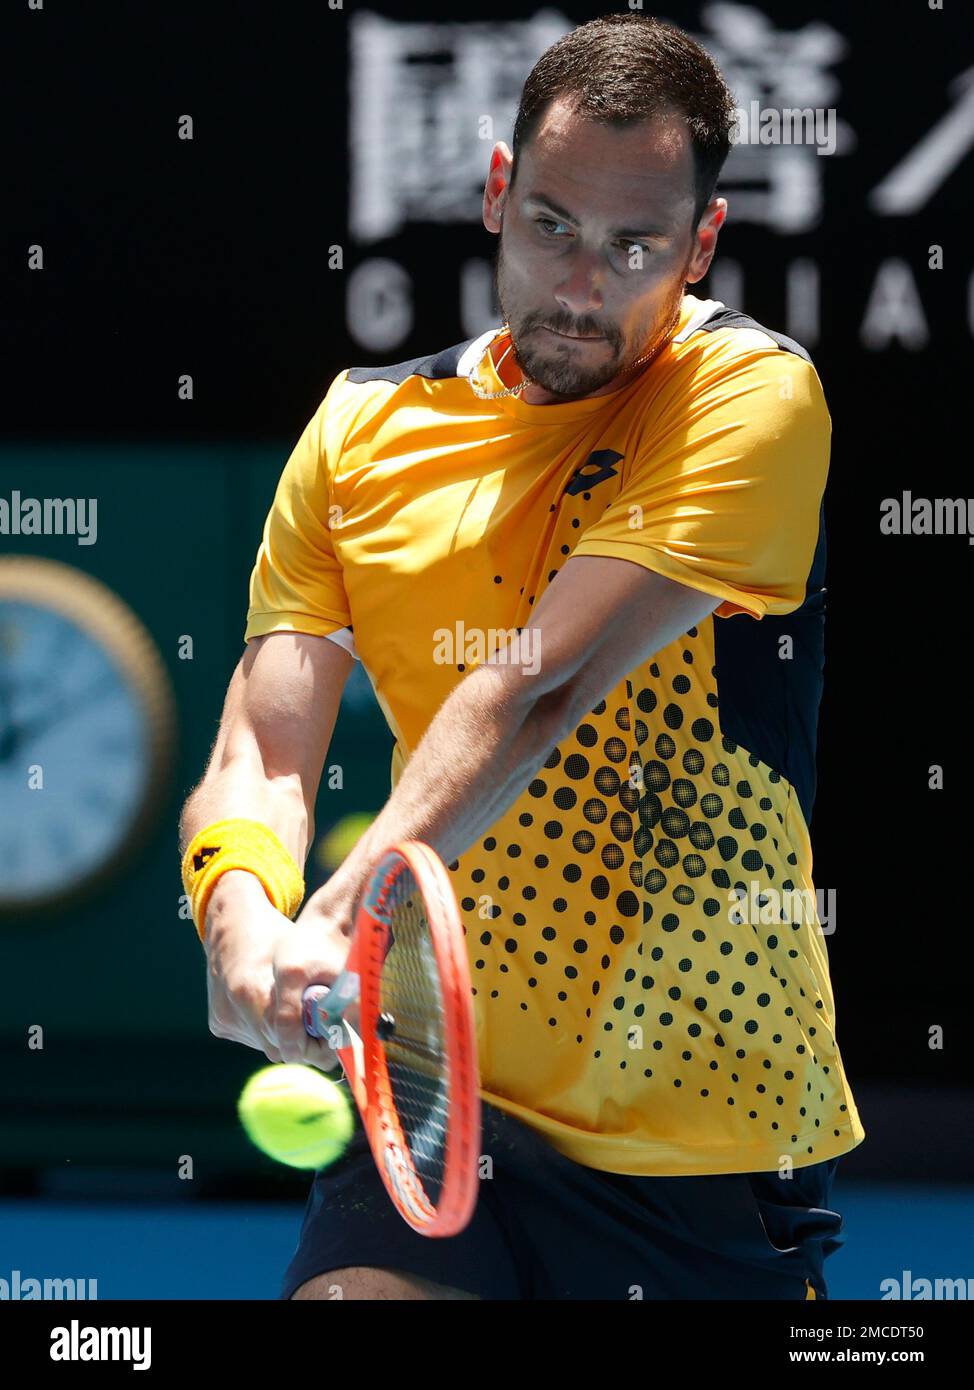 Gianluca Mager of Italy plays a backhand return to Andrey Rublev of Russia  during their first round match at the Australian Open tennis championships  in Melbourne, Australia, Tuesday, Jan. 18, 2022. (AP